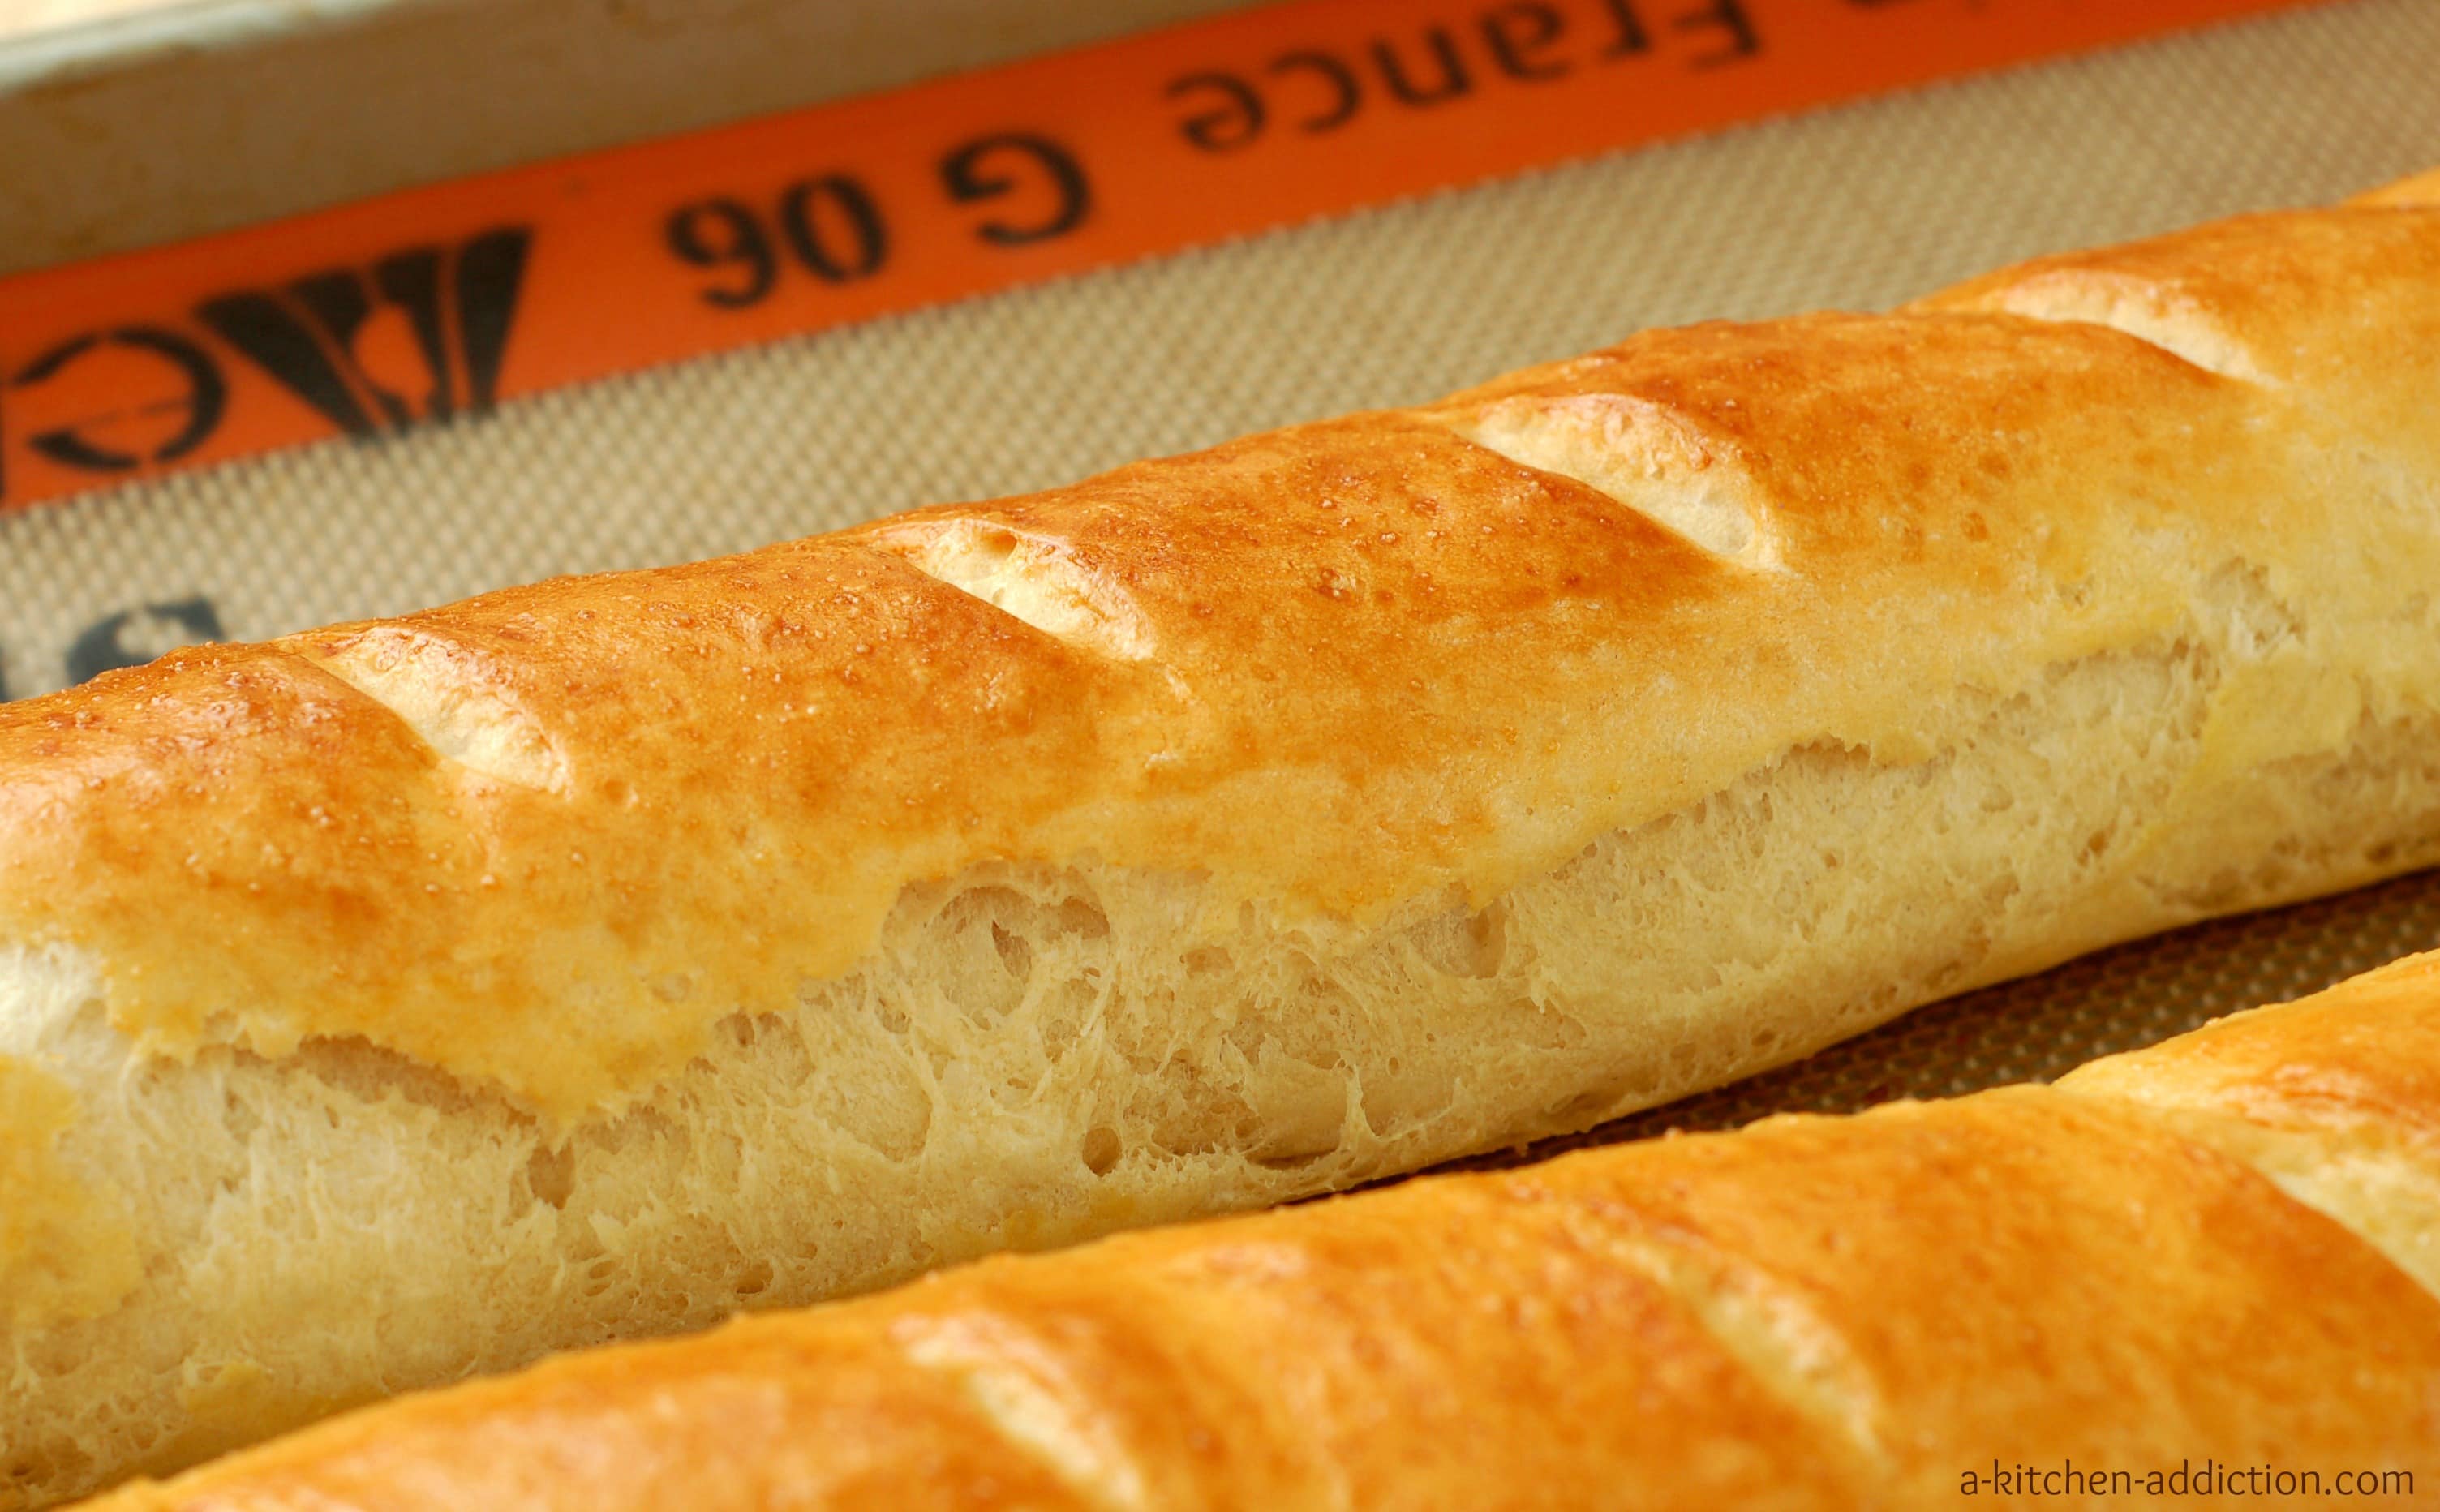 Make French Baguettes at Home 